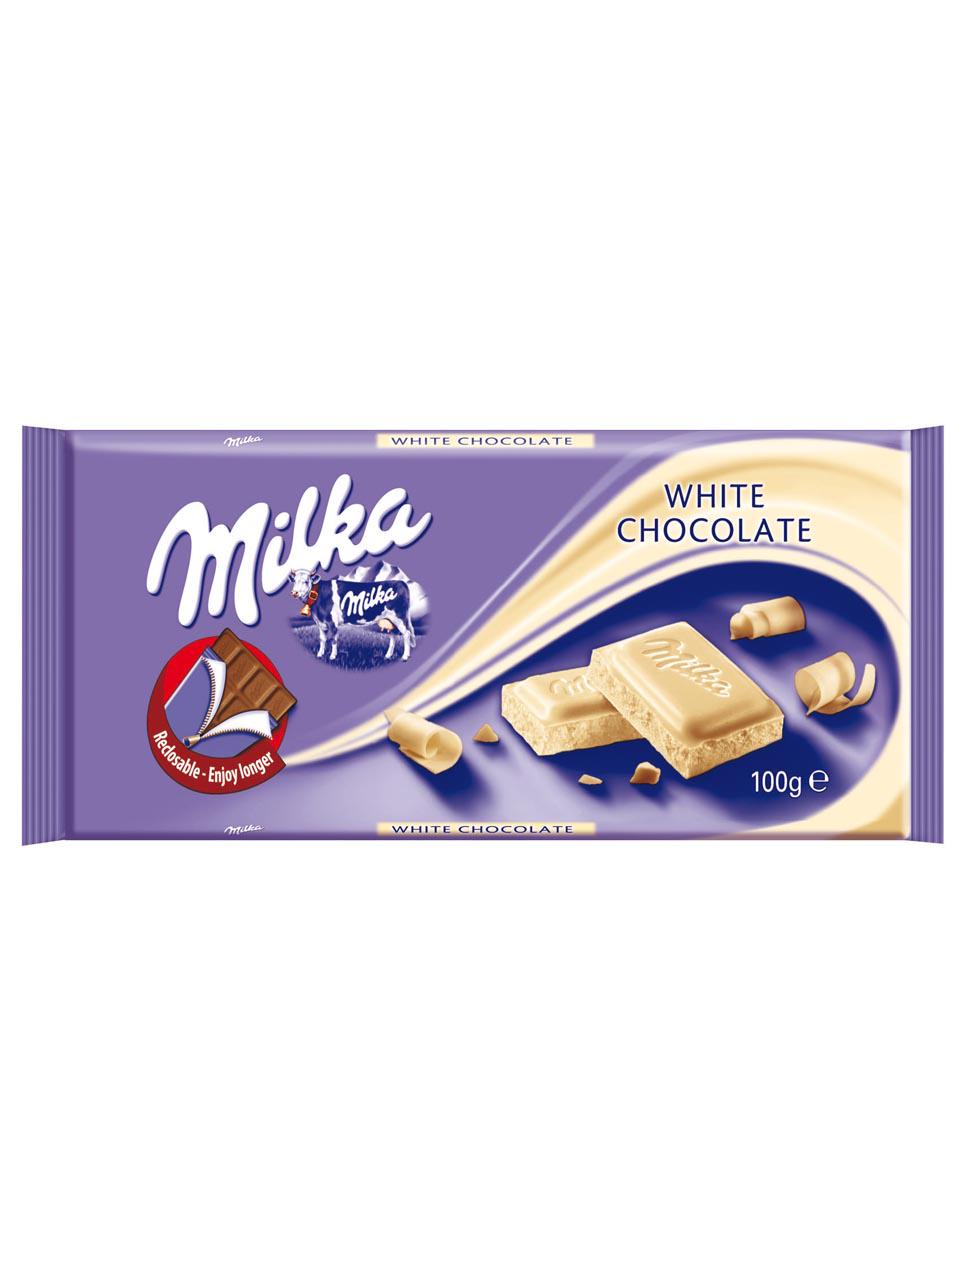 Milka Moments Assorted Pouch 400g  Frankfurt Airport Online Shopping